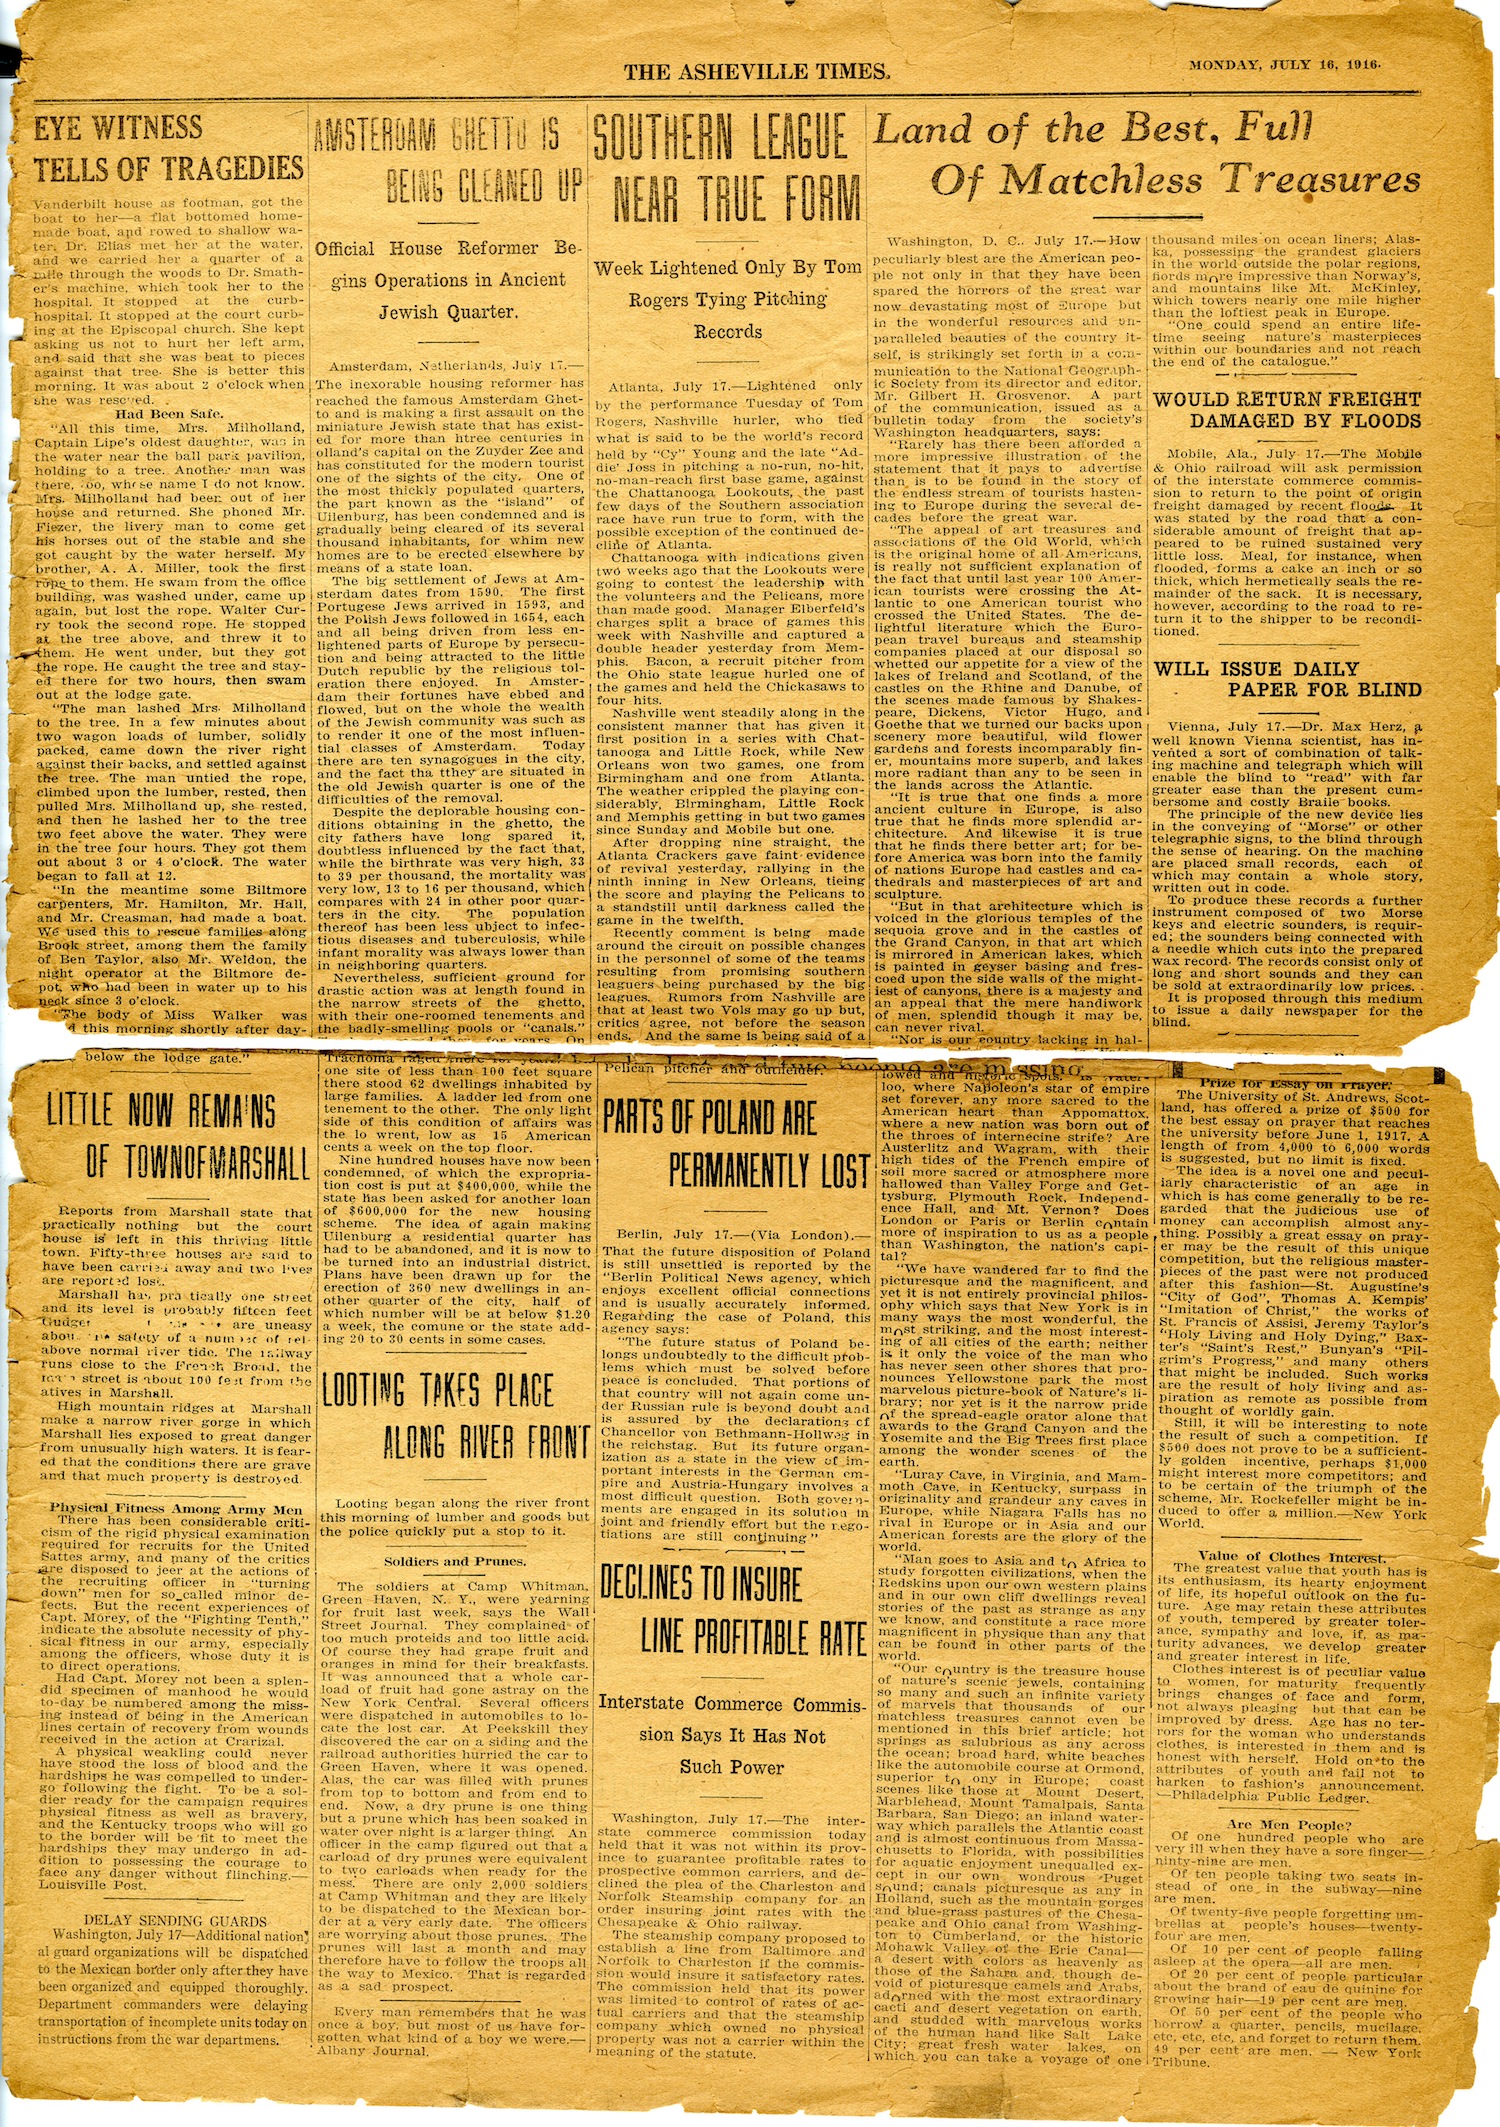 Asheville Times July 16, 1916 page 3